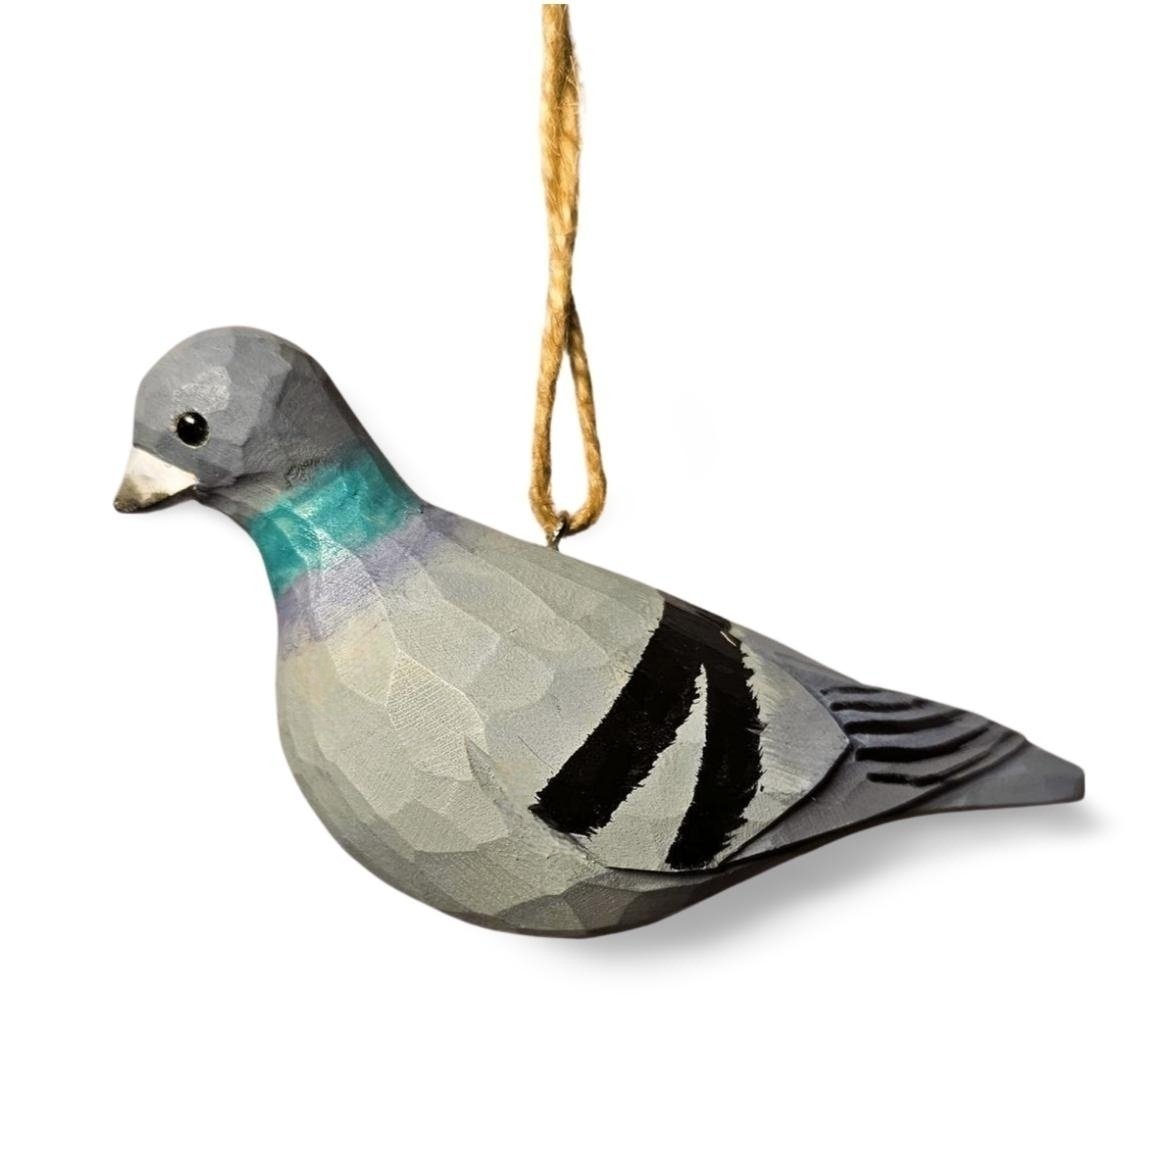 Exquisite Hand-Painted Pigeon Ornaments - A Perfect Addition to Your Home Decor - Wooden Islands